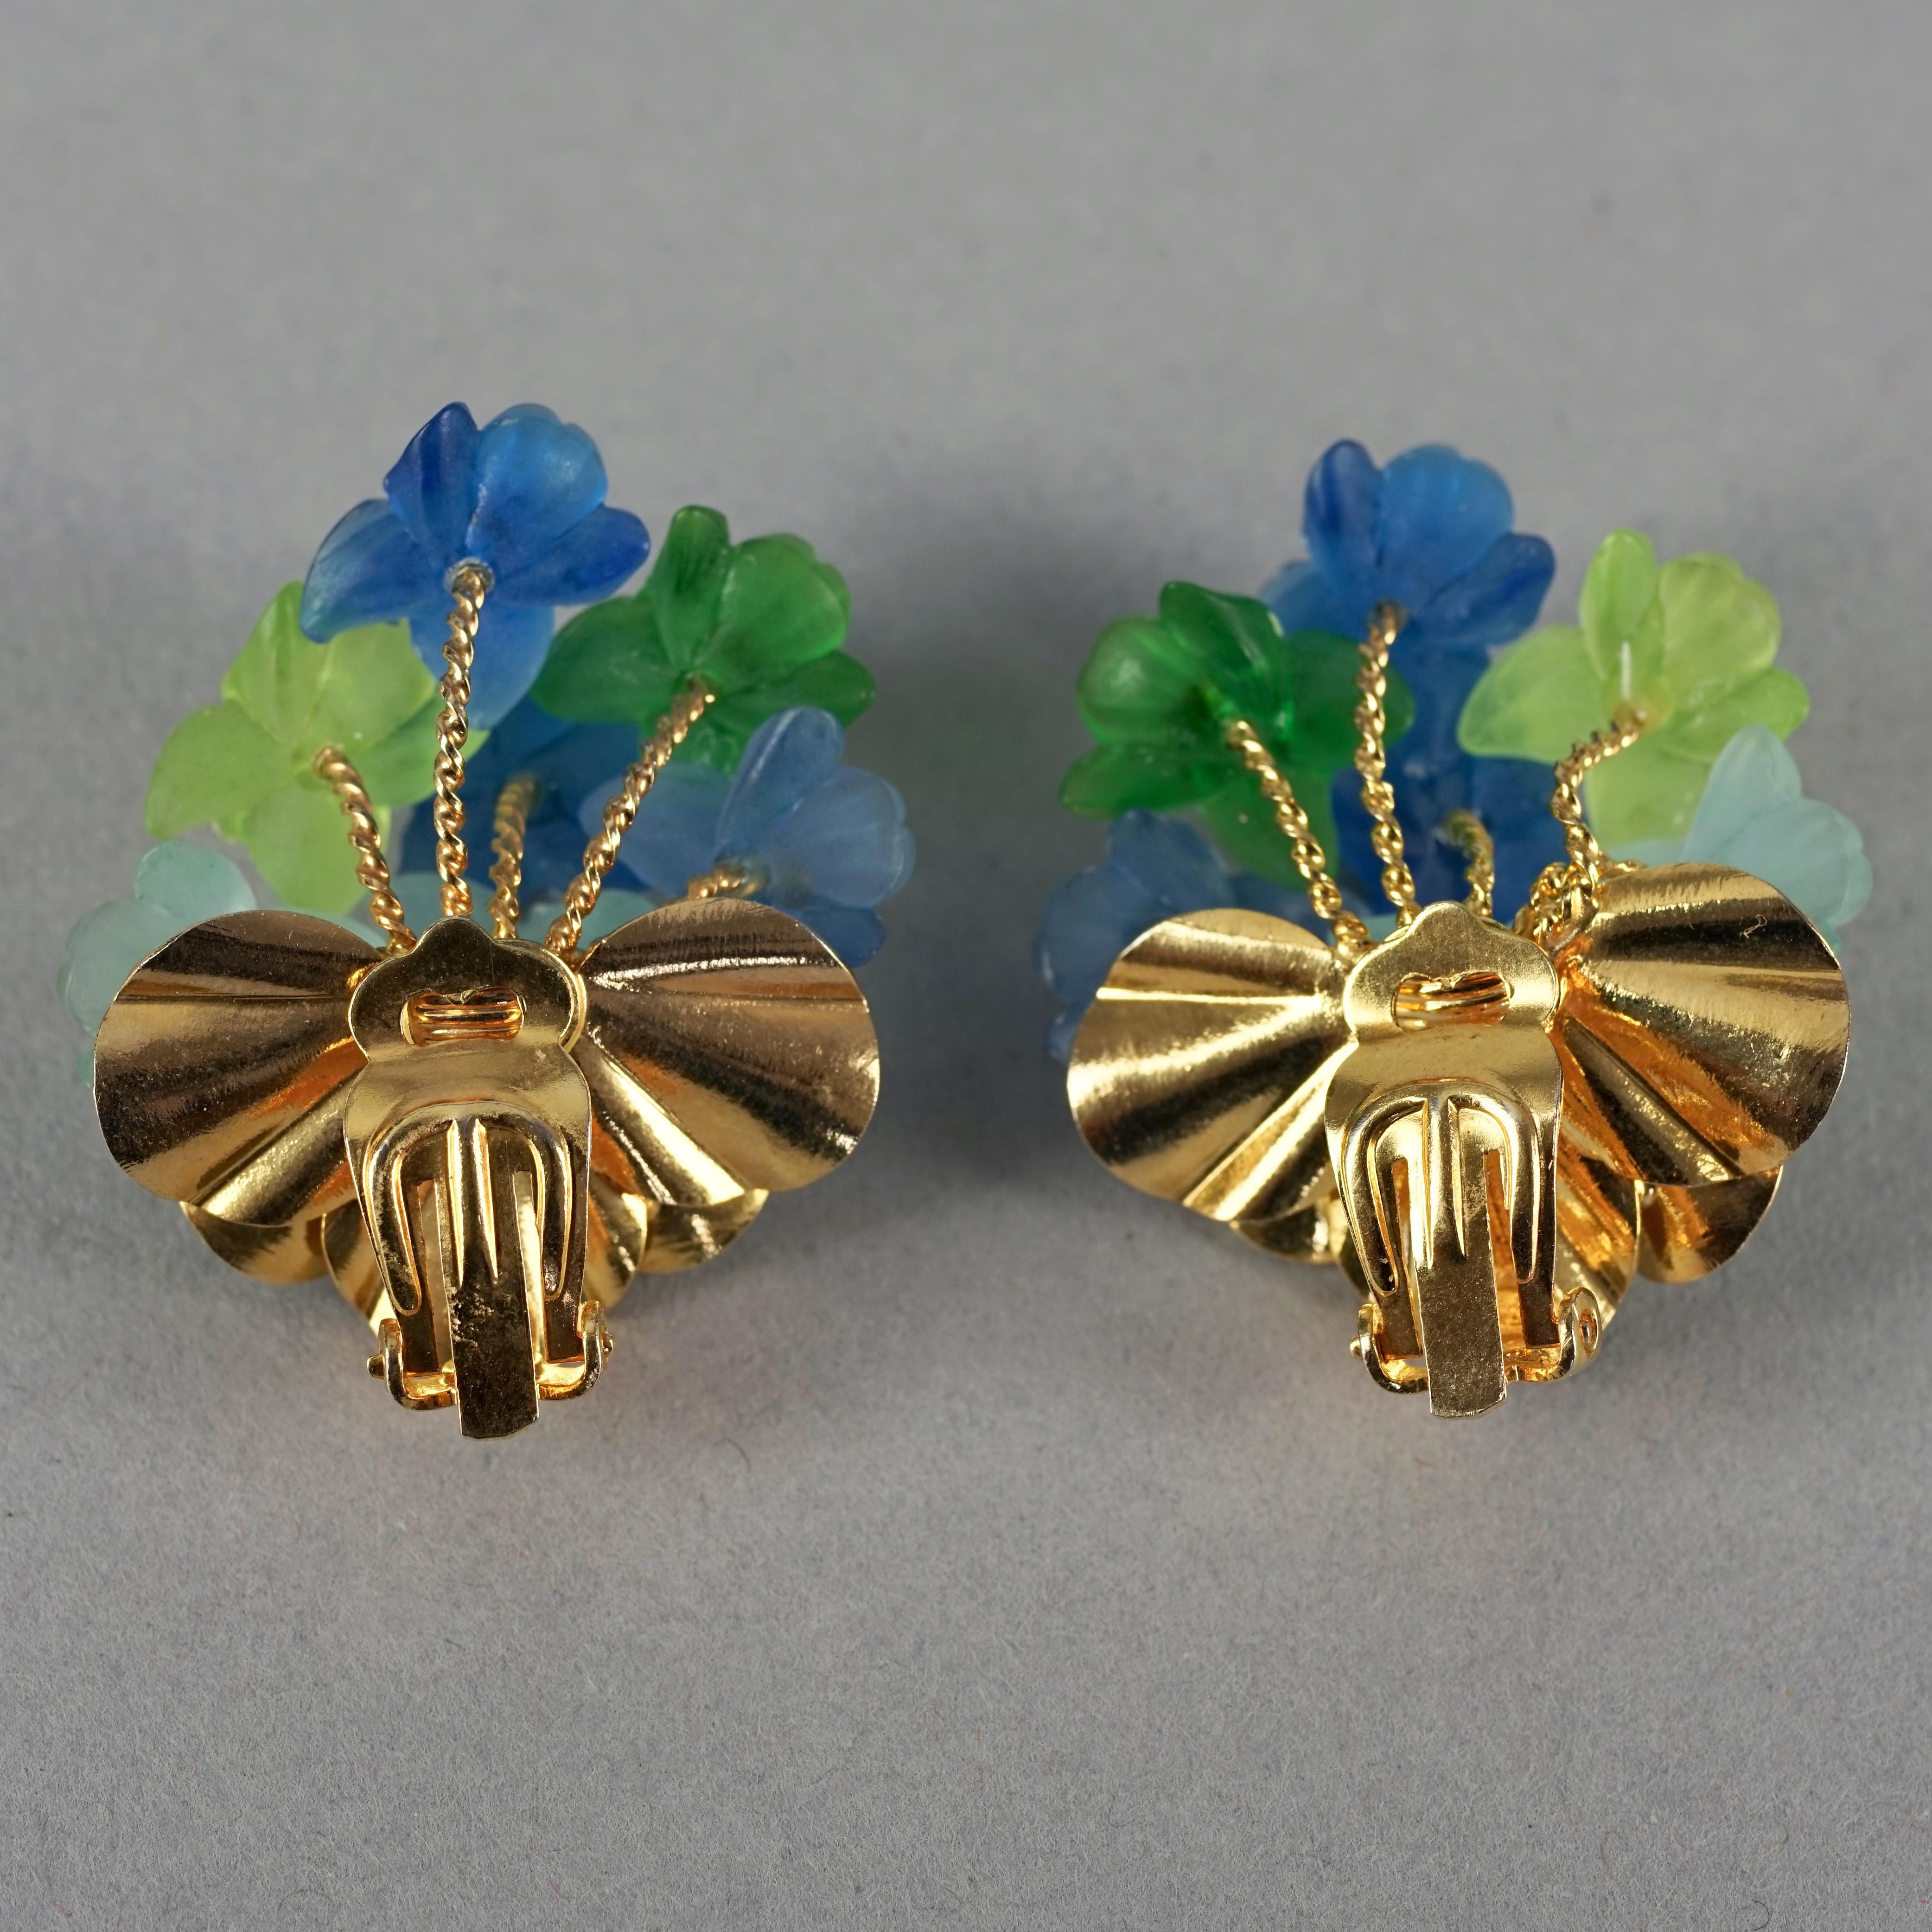 Vintage 1968 CHRISTIAN DIOR Lucite Bouquet Flower Earrings For Sale 3